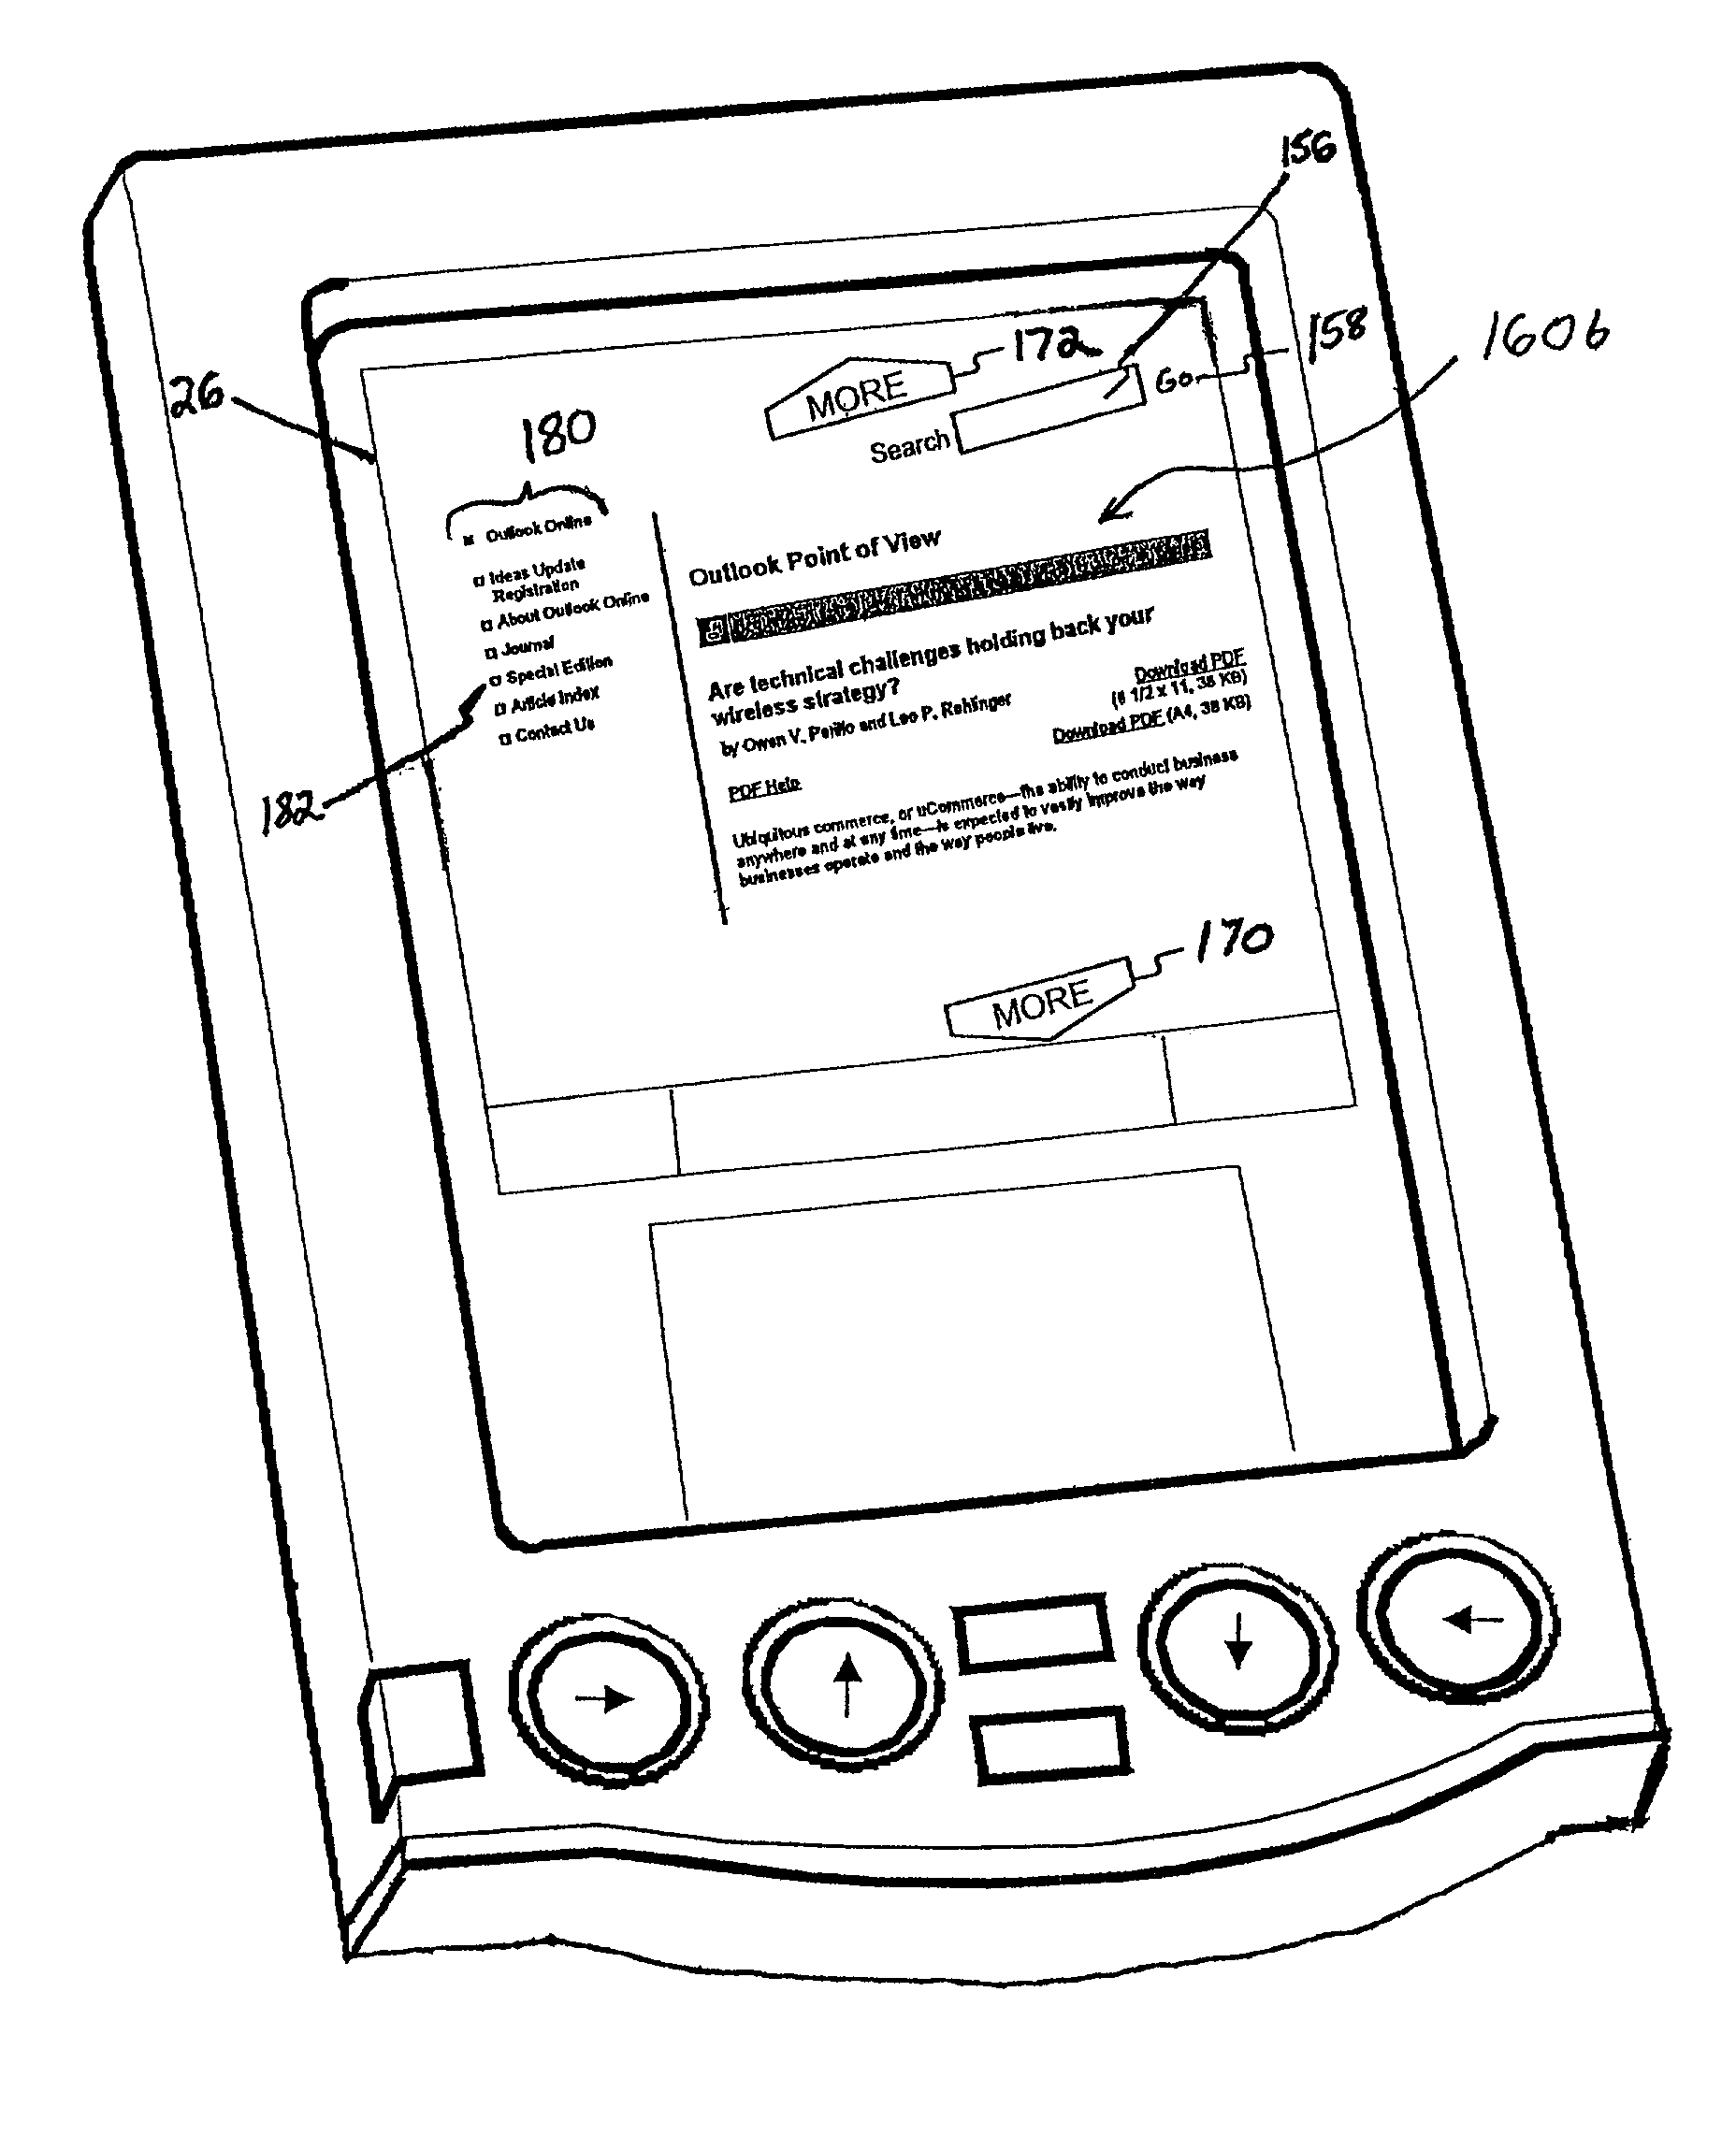 Retrieving documents over a network with a wireless communication device